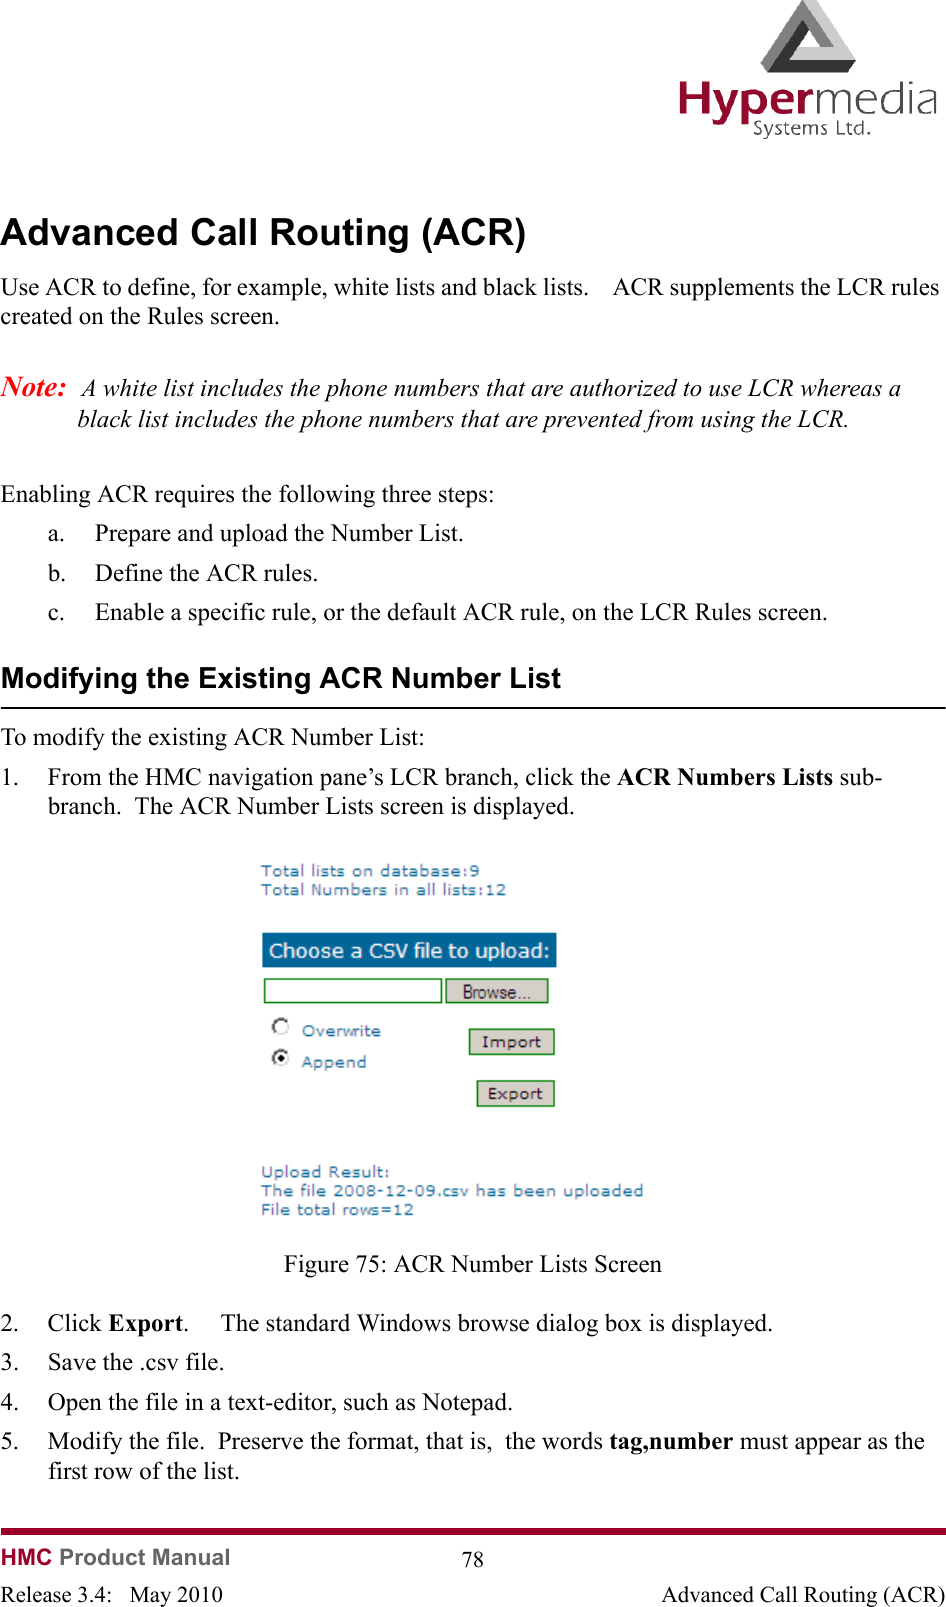   HMC Product Manual  78Release 3.4:   May 2010 Advanced Call Routing (ACR)Advanced Call Routing (ACR)Use ACR to define, for example, white lists and black lists.    ACR supplements the LCR rules created on the Rules screen.Note:  A white list includes the phone numbers that are authorized to use LCR whereas a black list includes the phone numbers that are prevented from using the LCR.Enabling ACR requires the following three steps:a. Prepare and upload the Number List.b. Define the ACR rules.c. Enable a specific rule, or the default ACR rule, on the LCR Rules screen. Modifying the Existing ACR Number ListTo modify the existing ACR Number List:1. From the HMC navigation pane’s LCR branch, click the ACR Numbers Lists sub-branch.  The ACR Number Lists screen is displayed.              Figure 75: ACR Number Lists Screen2. Click Export.     The standard Windows browse dialog box is displayed.3. Save the .csv file.4. Open the file in a text-editor, such as Notepad.5. Modify the file.  Preserve the format, that is,  the words tag,number must appear as the first row of the list.